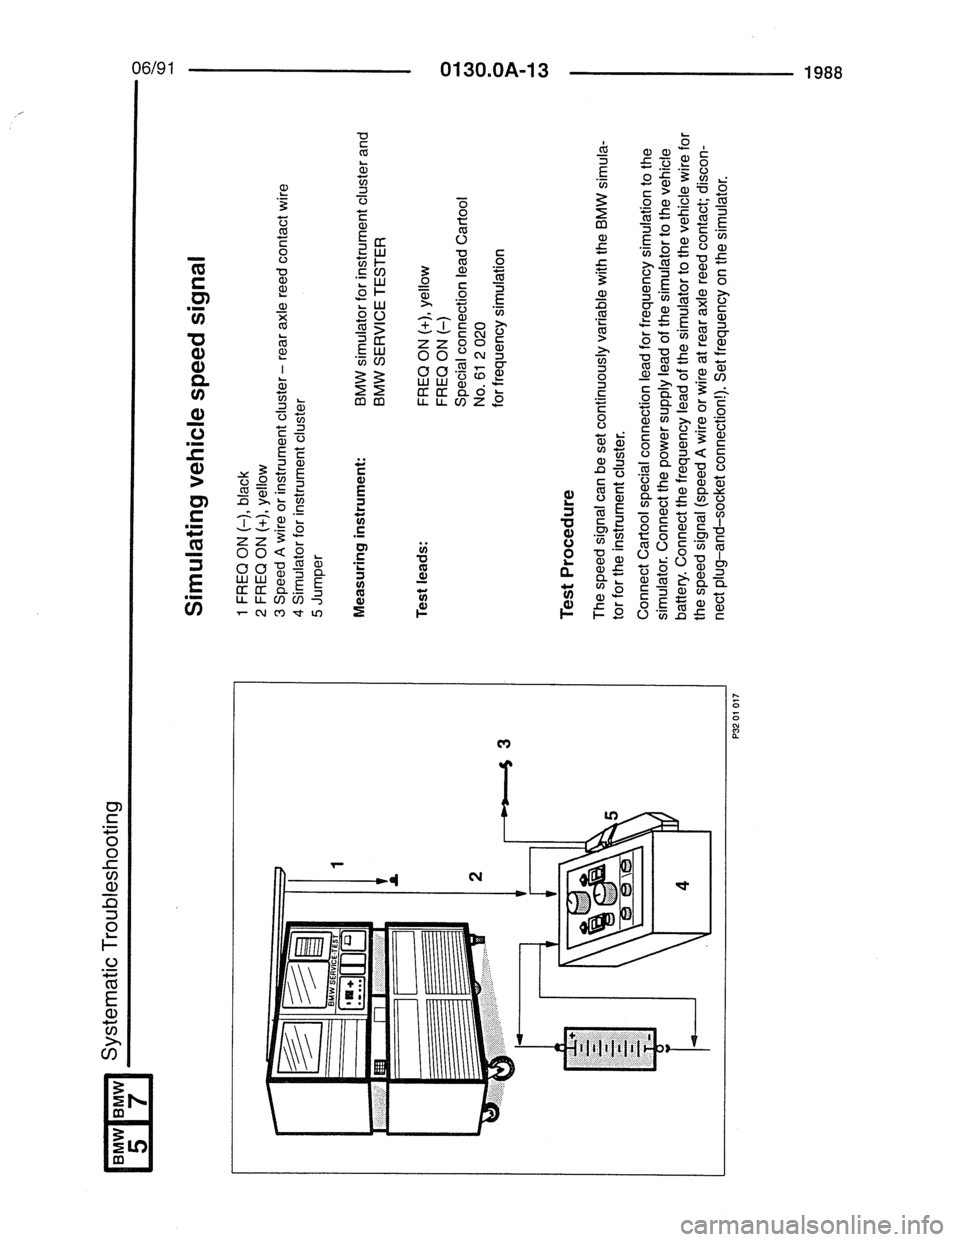 BMW 7 SERIES 1988 E32 Electrical Troubleshooting Manual 